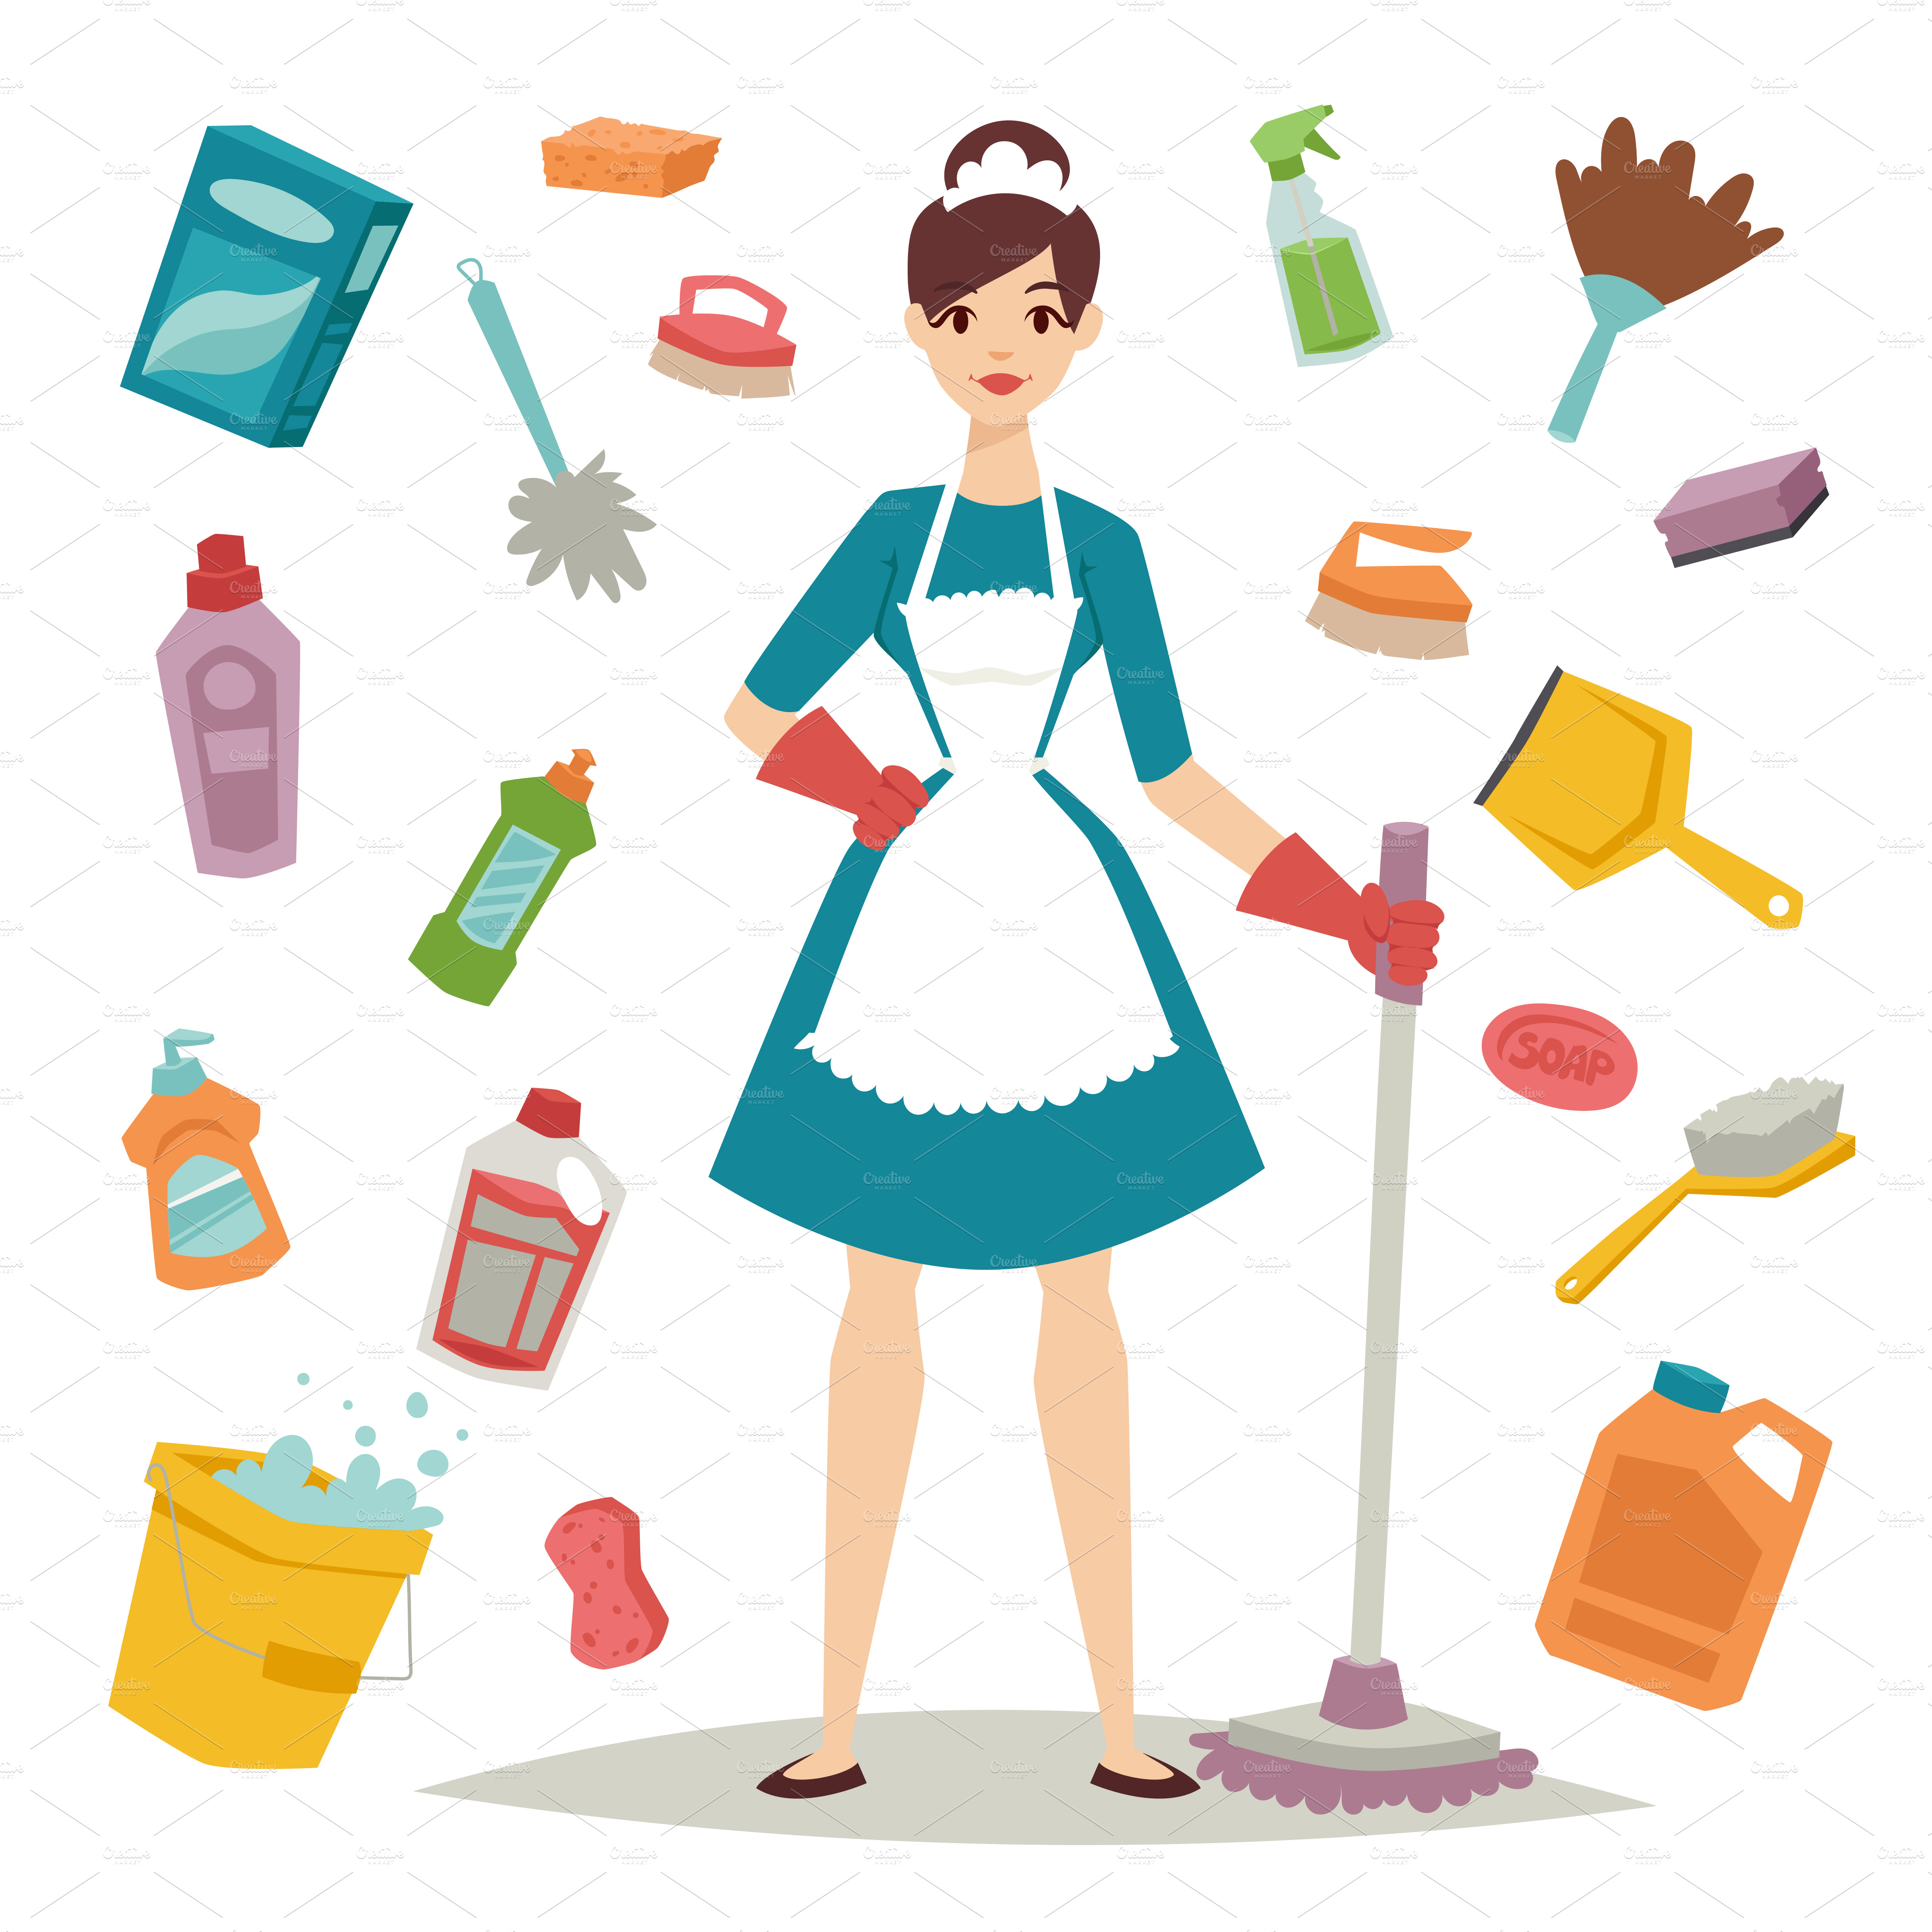 Housewife girl cleaning equipment ~ Illustrations ~ Creative Market